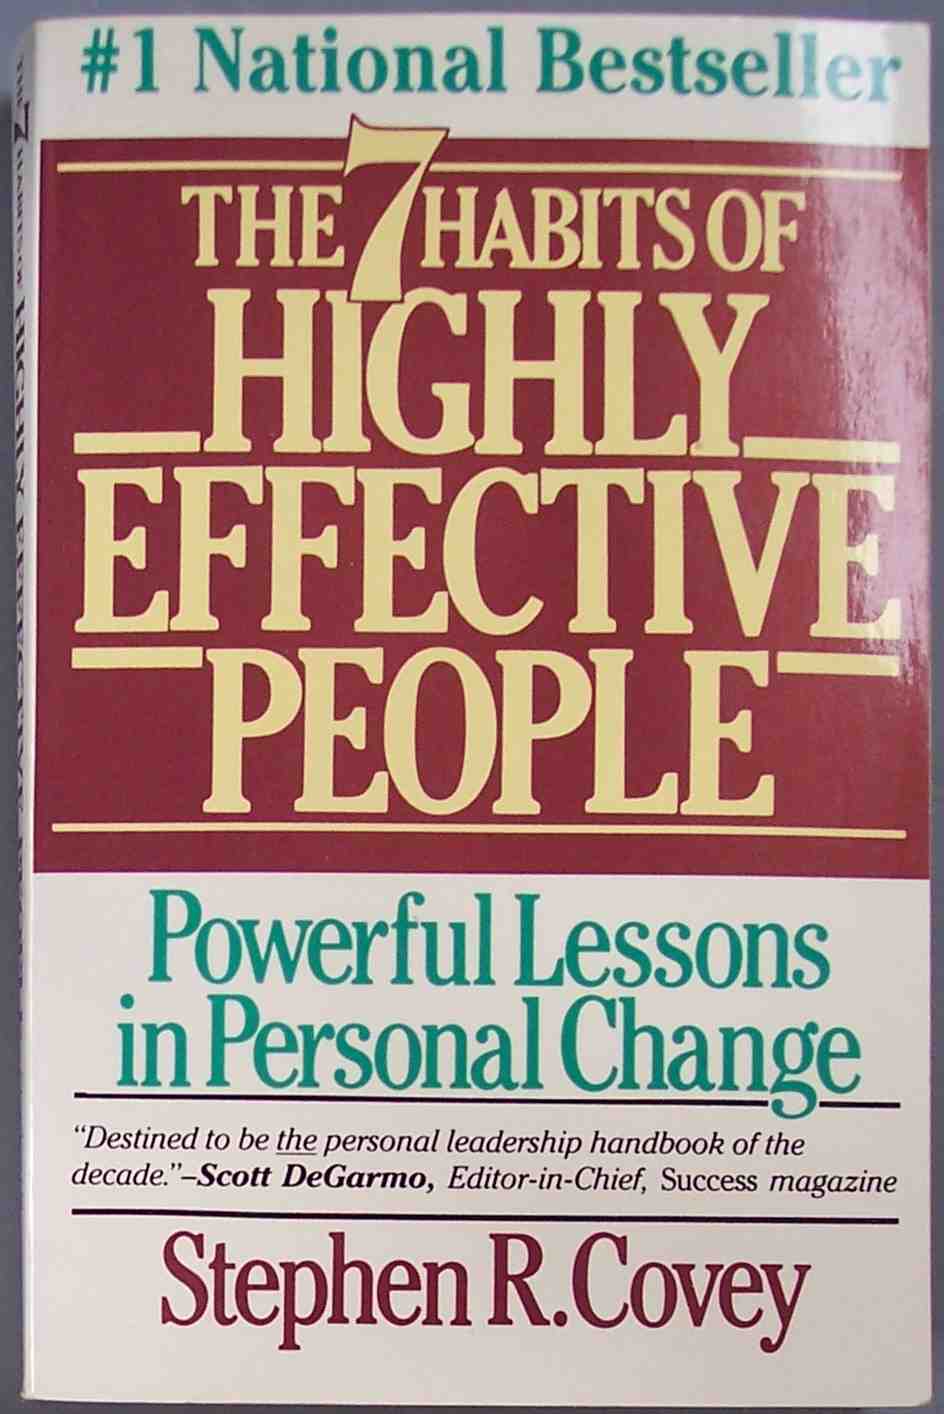 seven habits of highly effective people audiobook